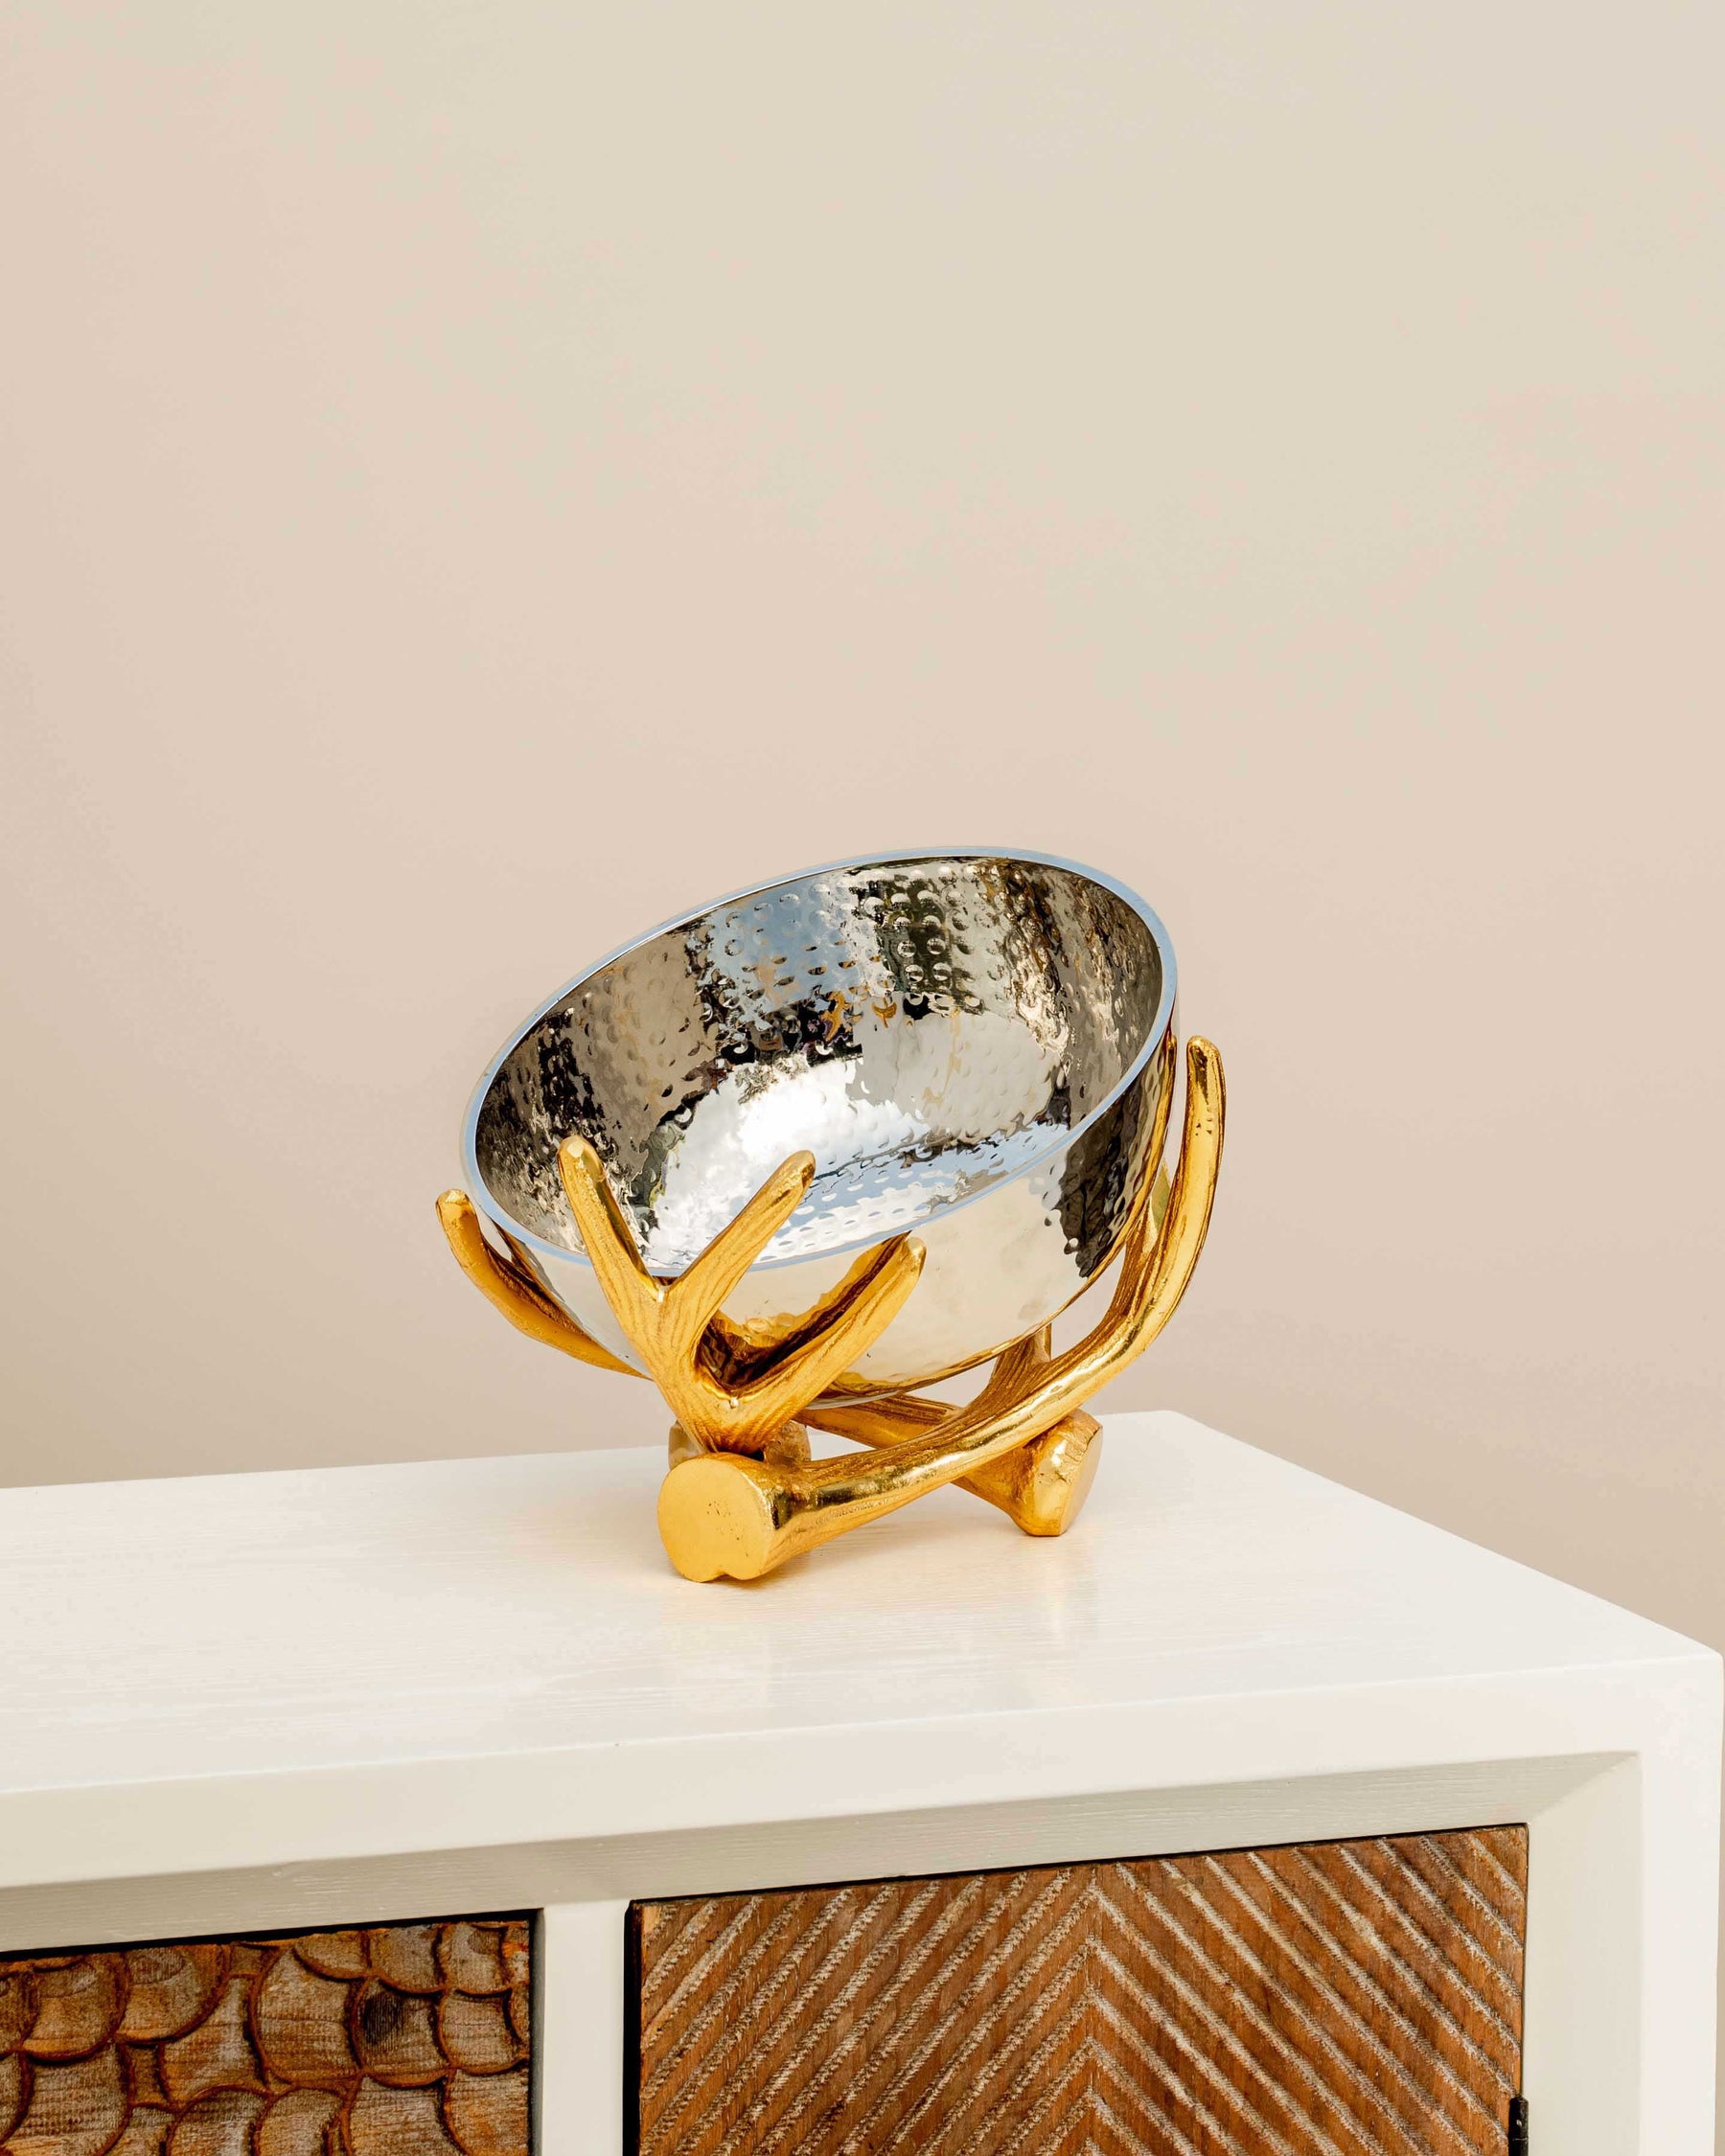 Metallic Silver Bowl With Rustic Gold Twig Stand - Large